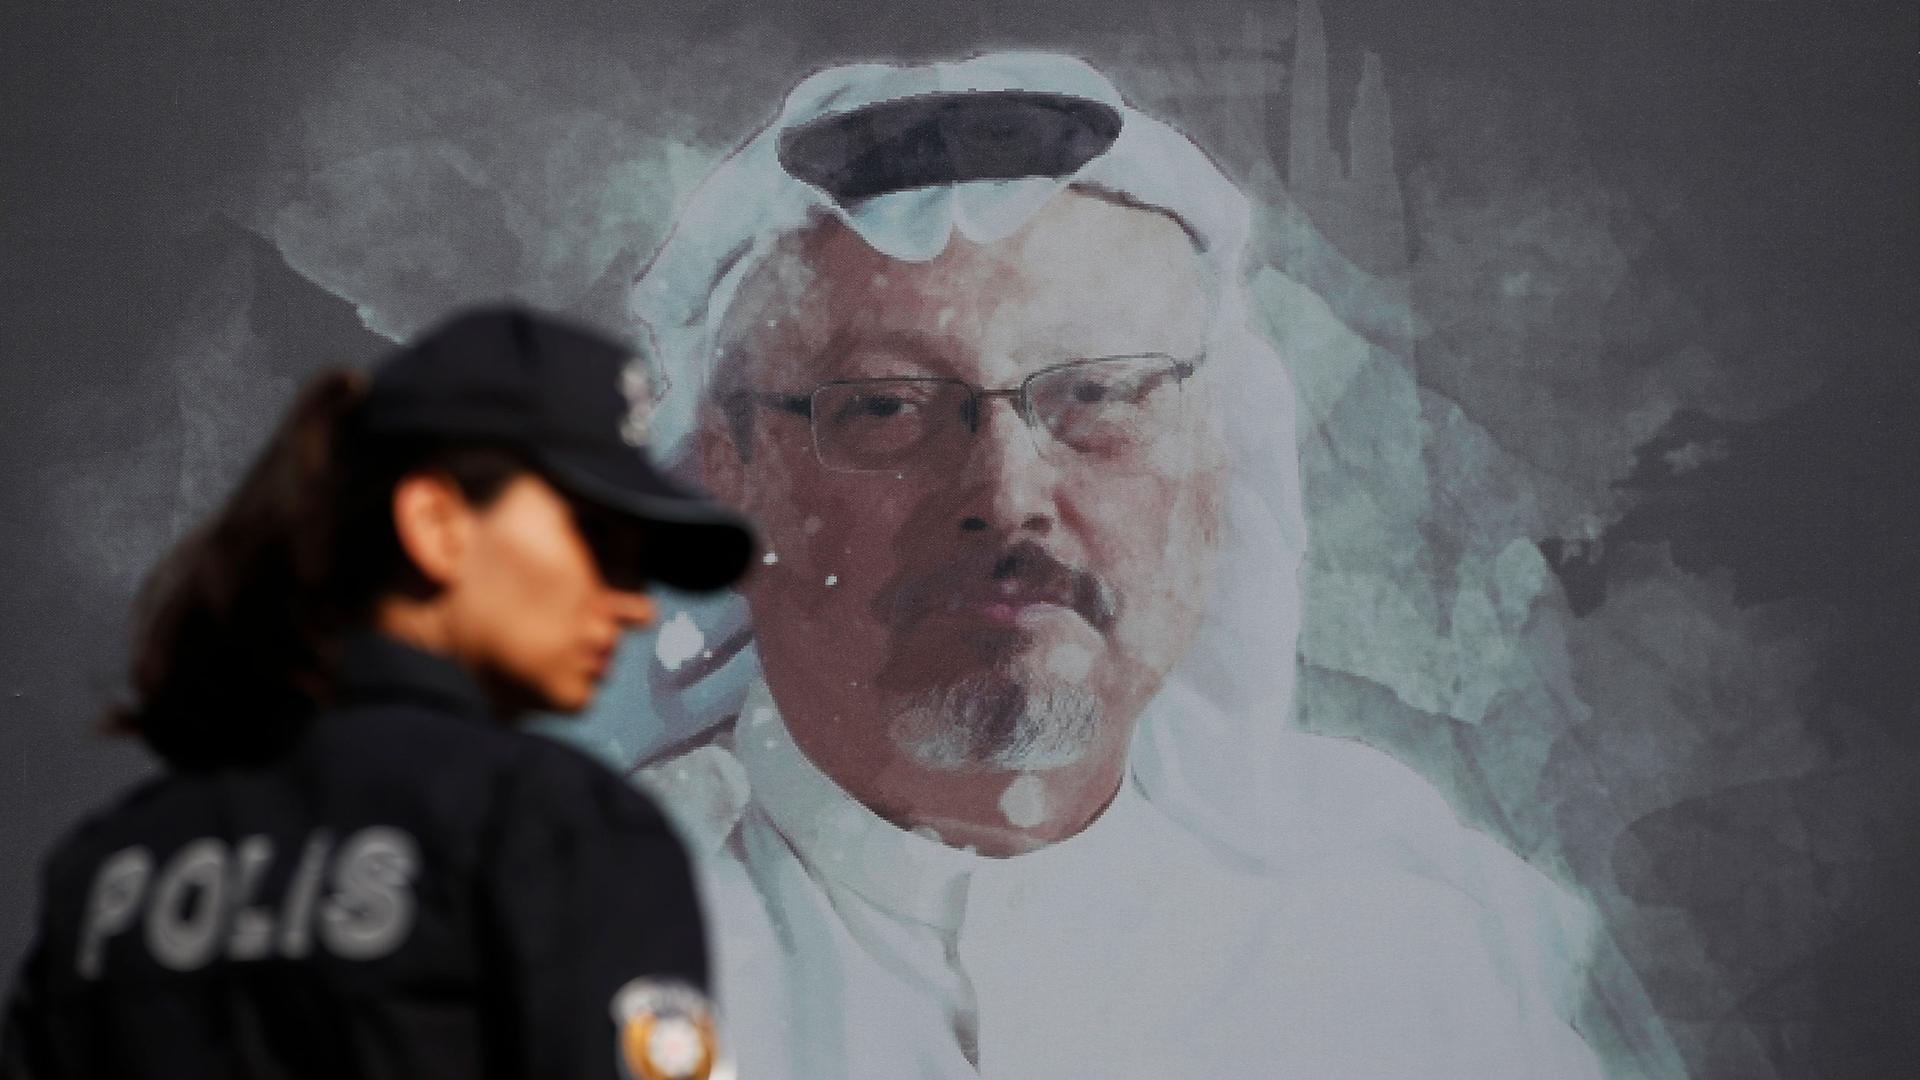 A police officer is shown looking over her right shoulder and wearing a hat with a portrait of slain Saudi journalist Jamal Khashoggi on the wall behind her.